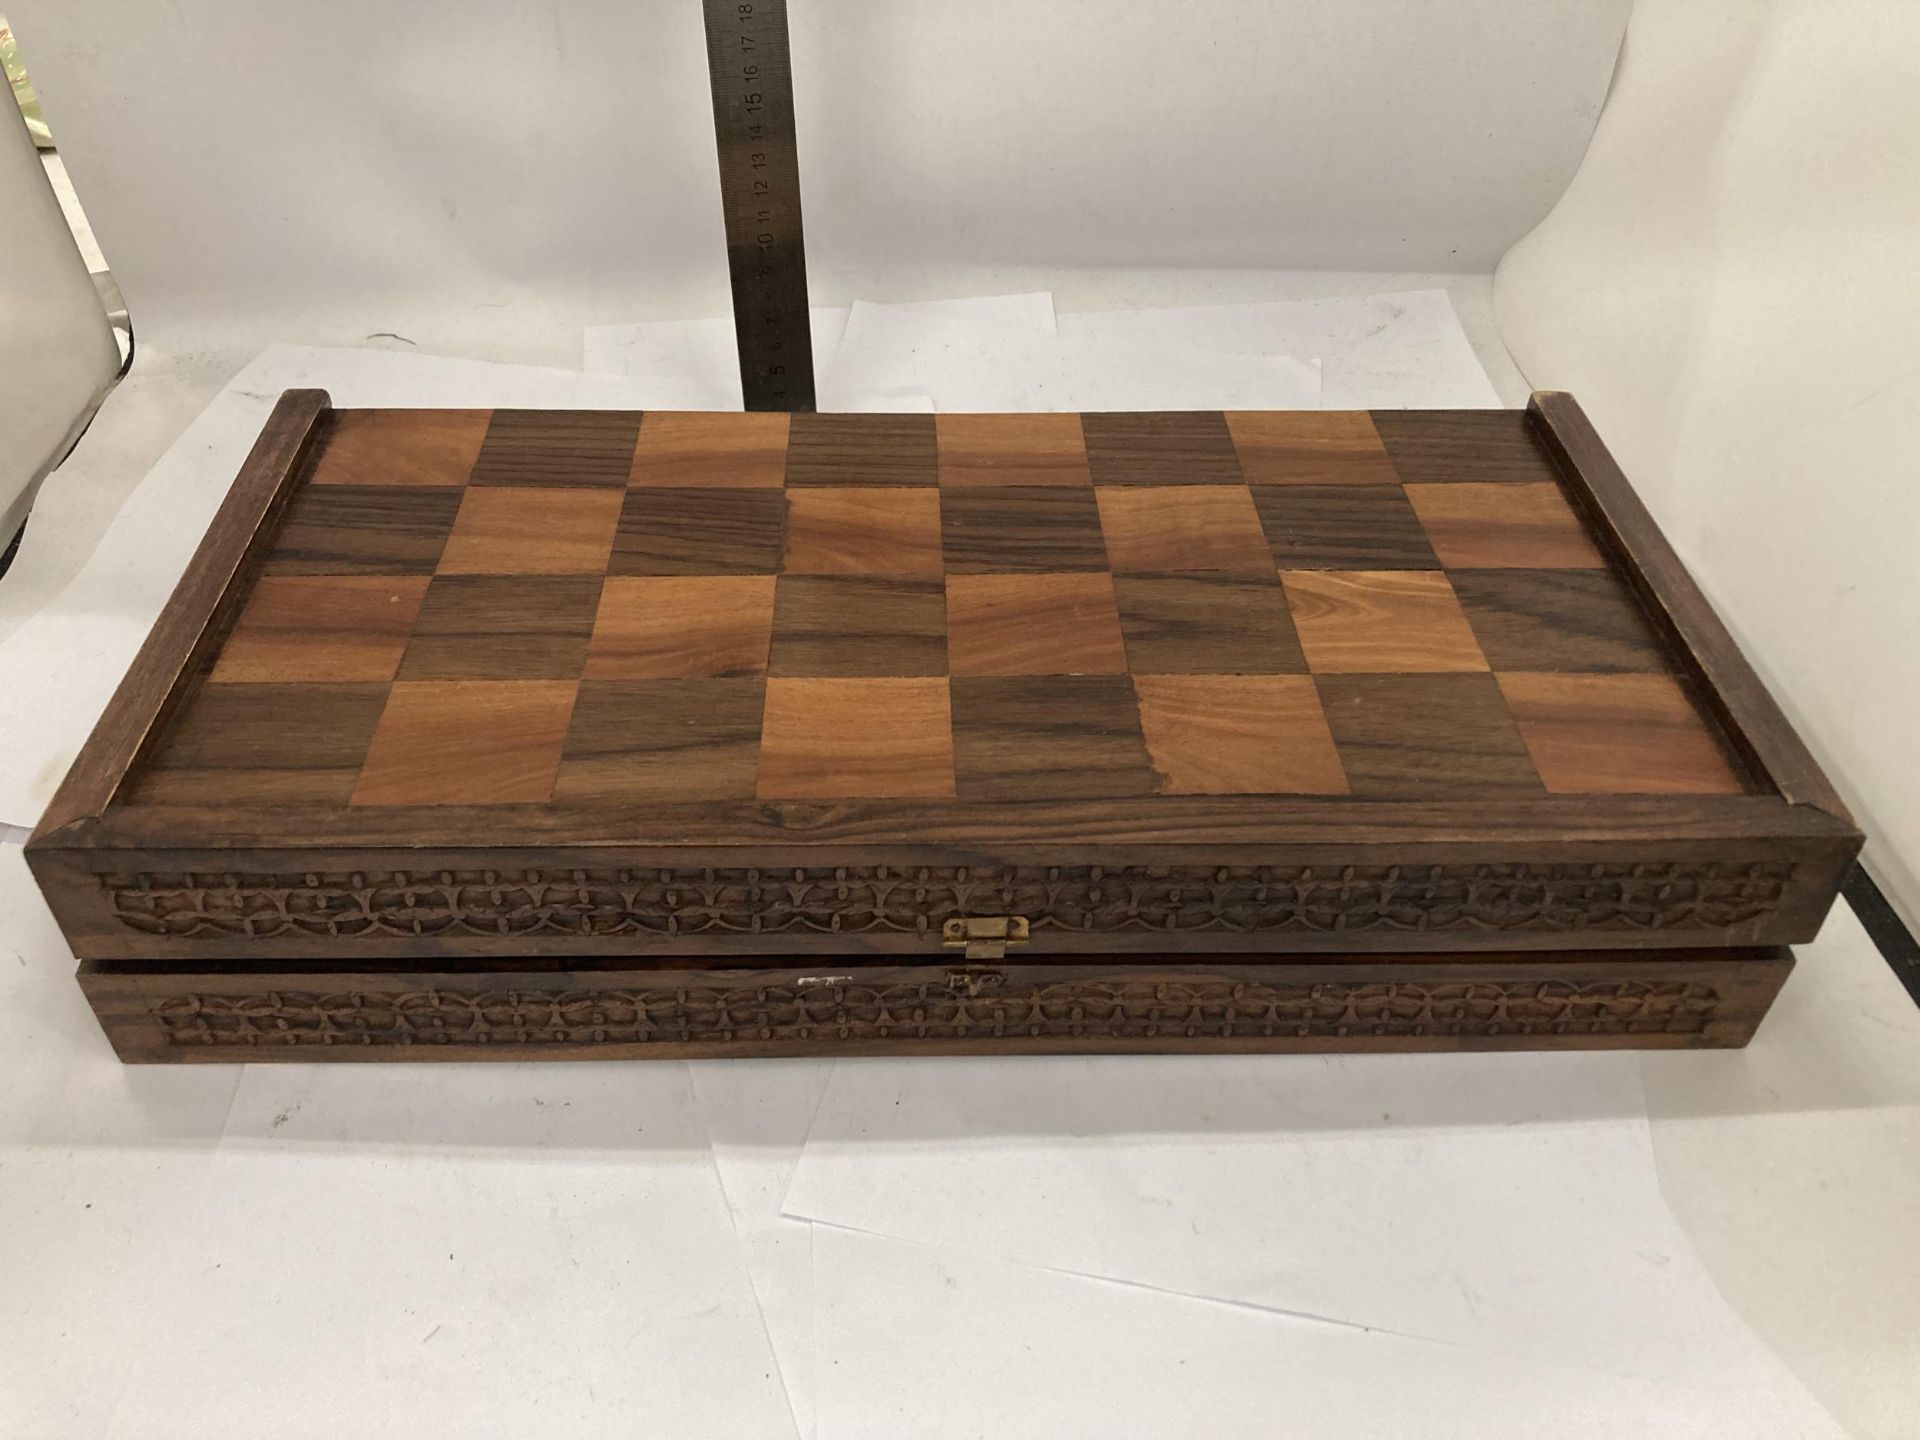 A VINTAGE HARDWOOD CHESS BOARD WITH CARVED WOODEN PIECES